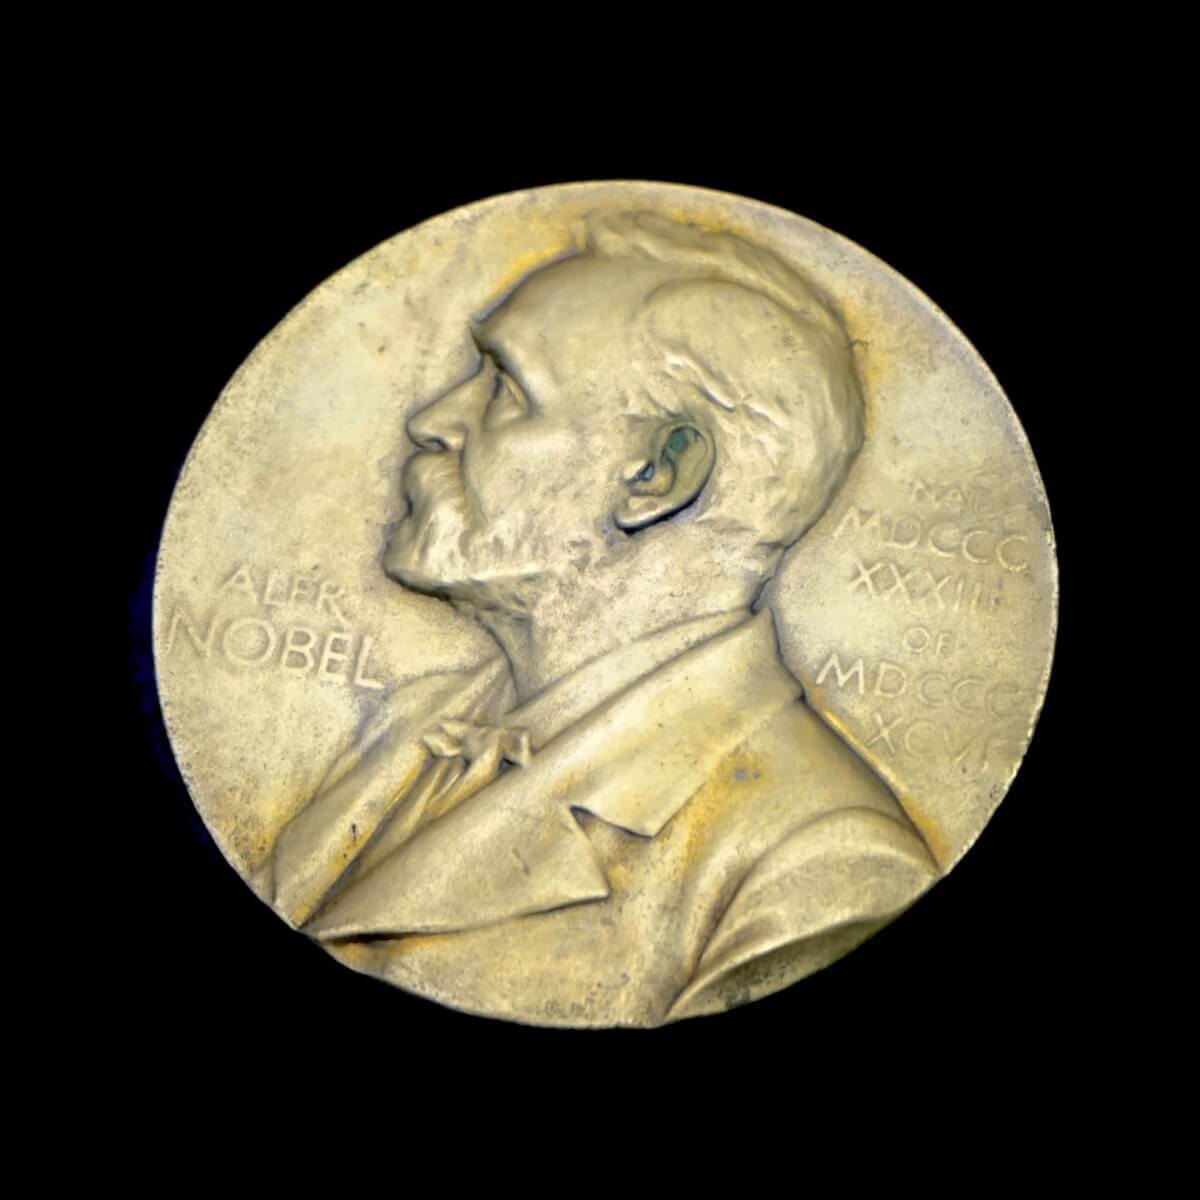 The Nobel Prize Ceremony this year will be held in a new format